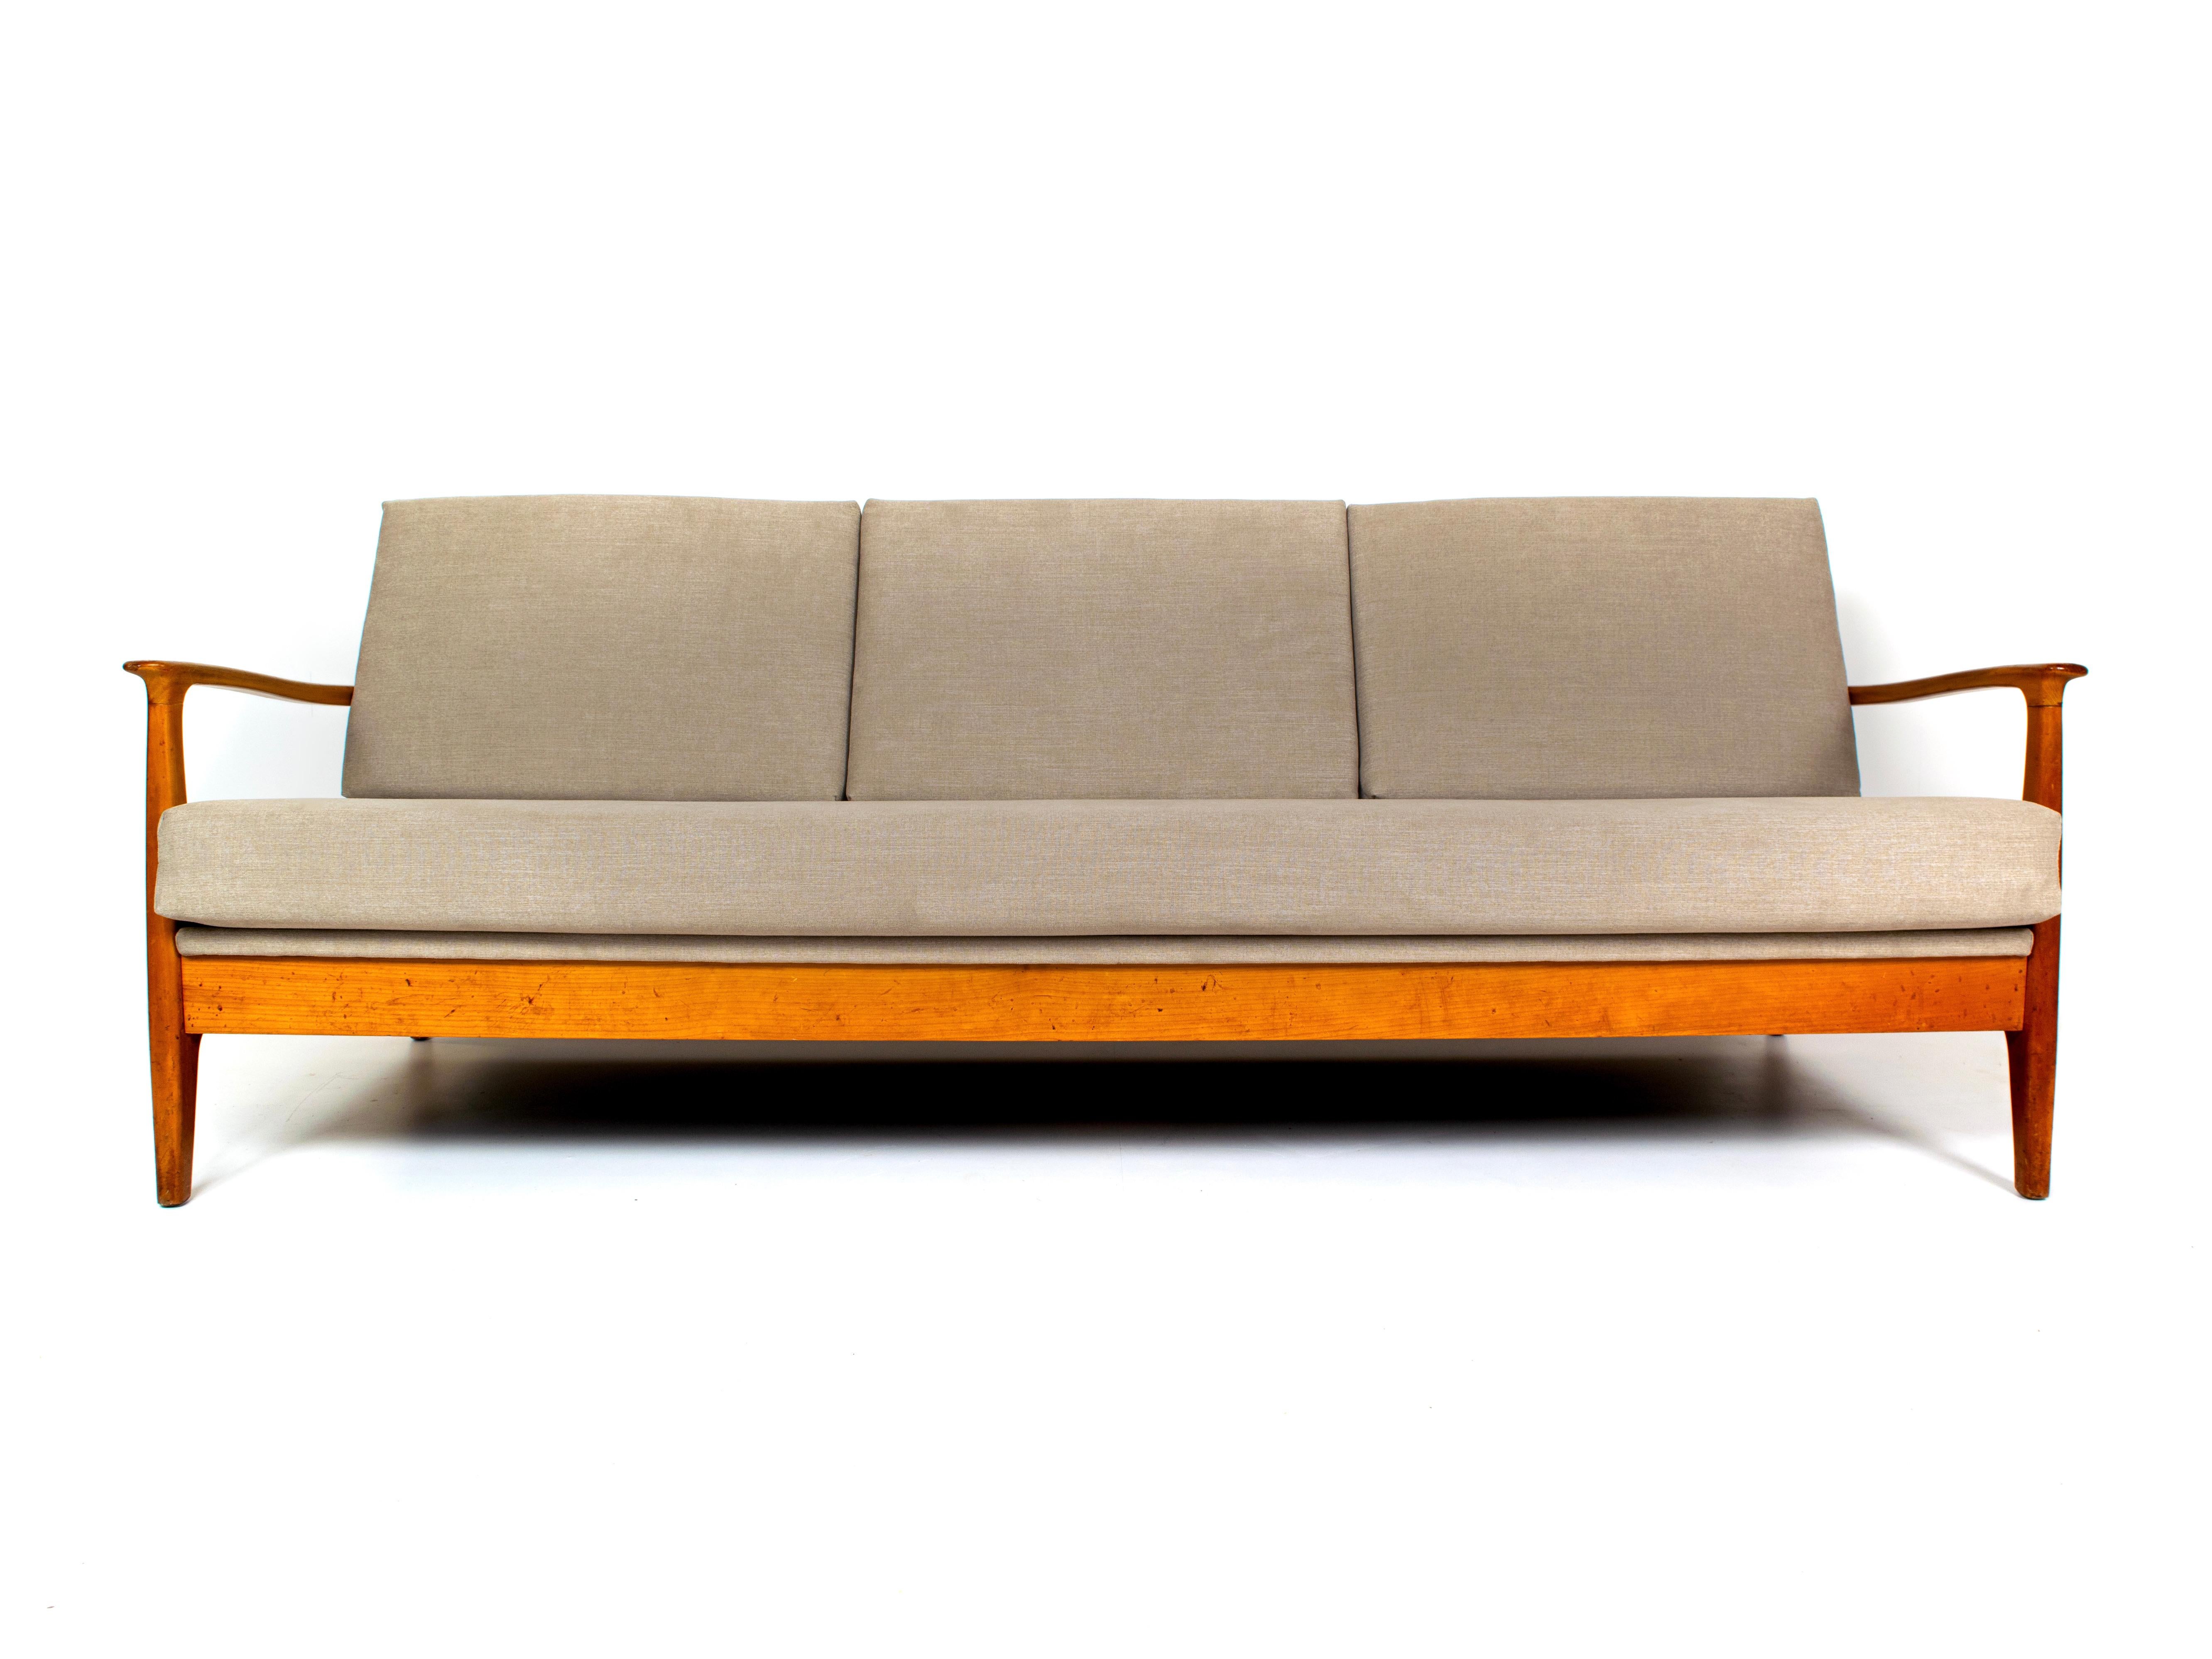 Extraordinary cherrywood sofa and daybed by Eugen Schmidt for Soloform, Germany, 1960s. This sofa fits three people and can be easily extended into a daybed. The entire sofa has been re-upholstered, also the complete back and the mechanism for the